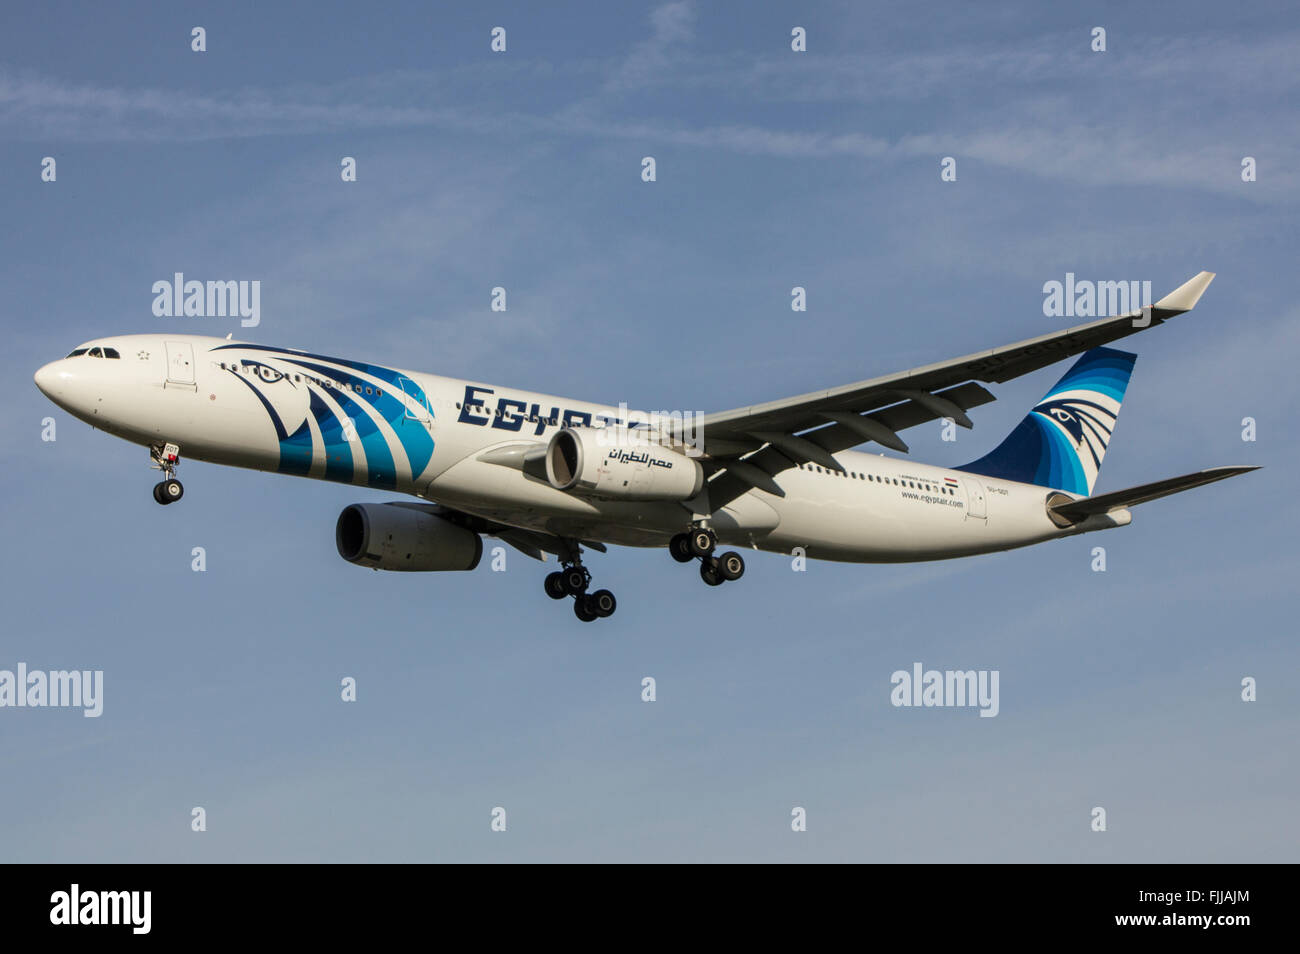 A330 Egyptair Airlines landing at LHR London Heathrow Airport Stock Photo